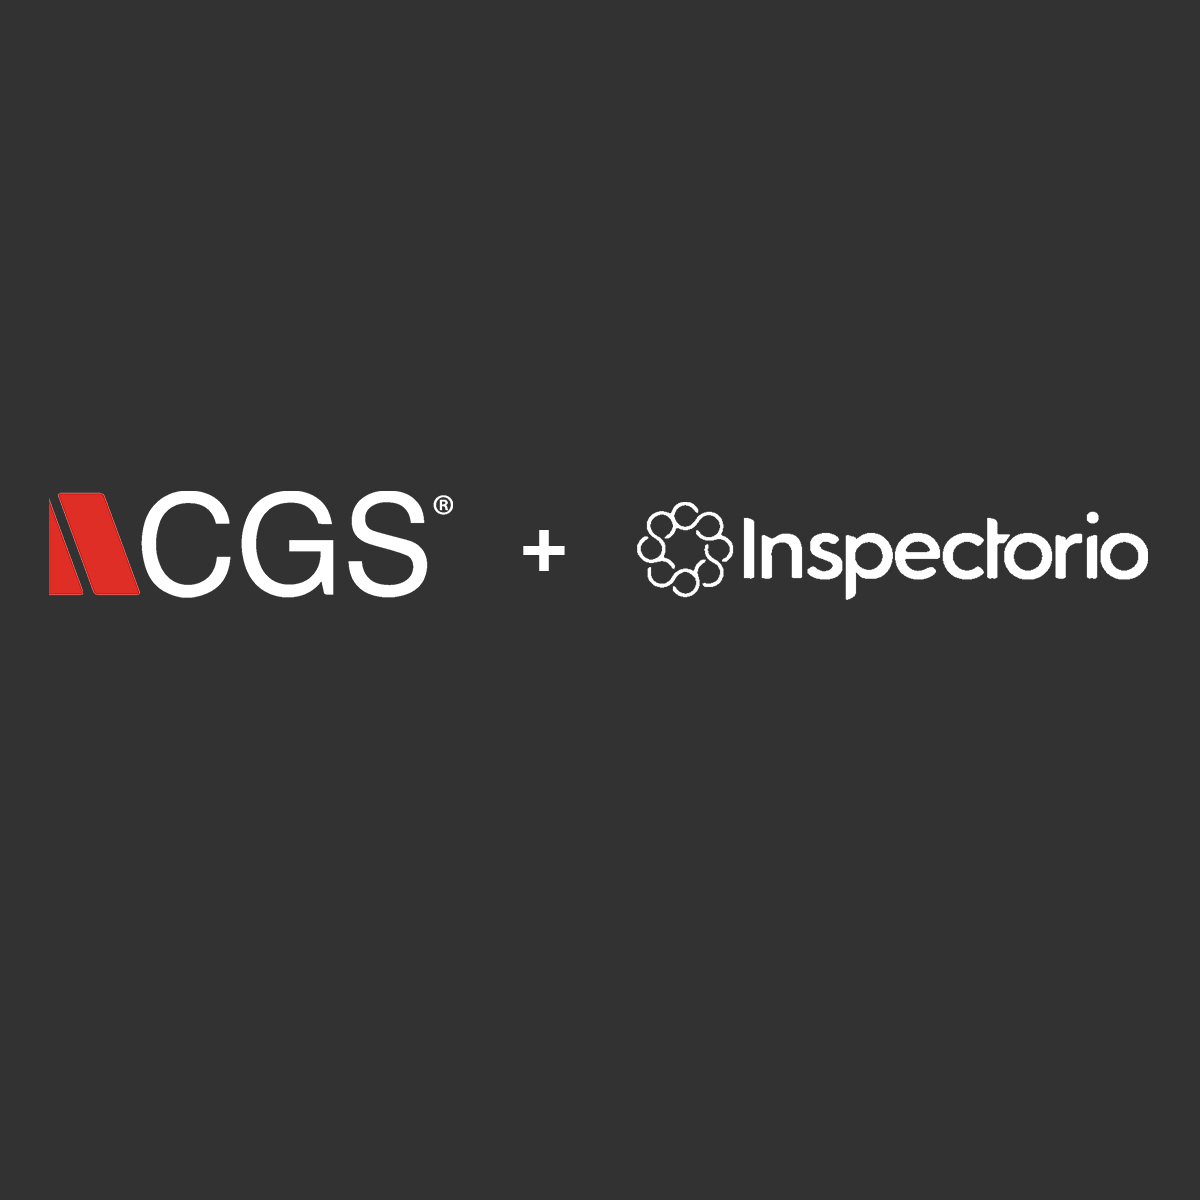 CGS and Inspectorio Partner to Deliver Deep Visibility, Transparency and End-to-End Quality Control for Fashion Brands, Manufacturers and Retailers